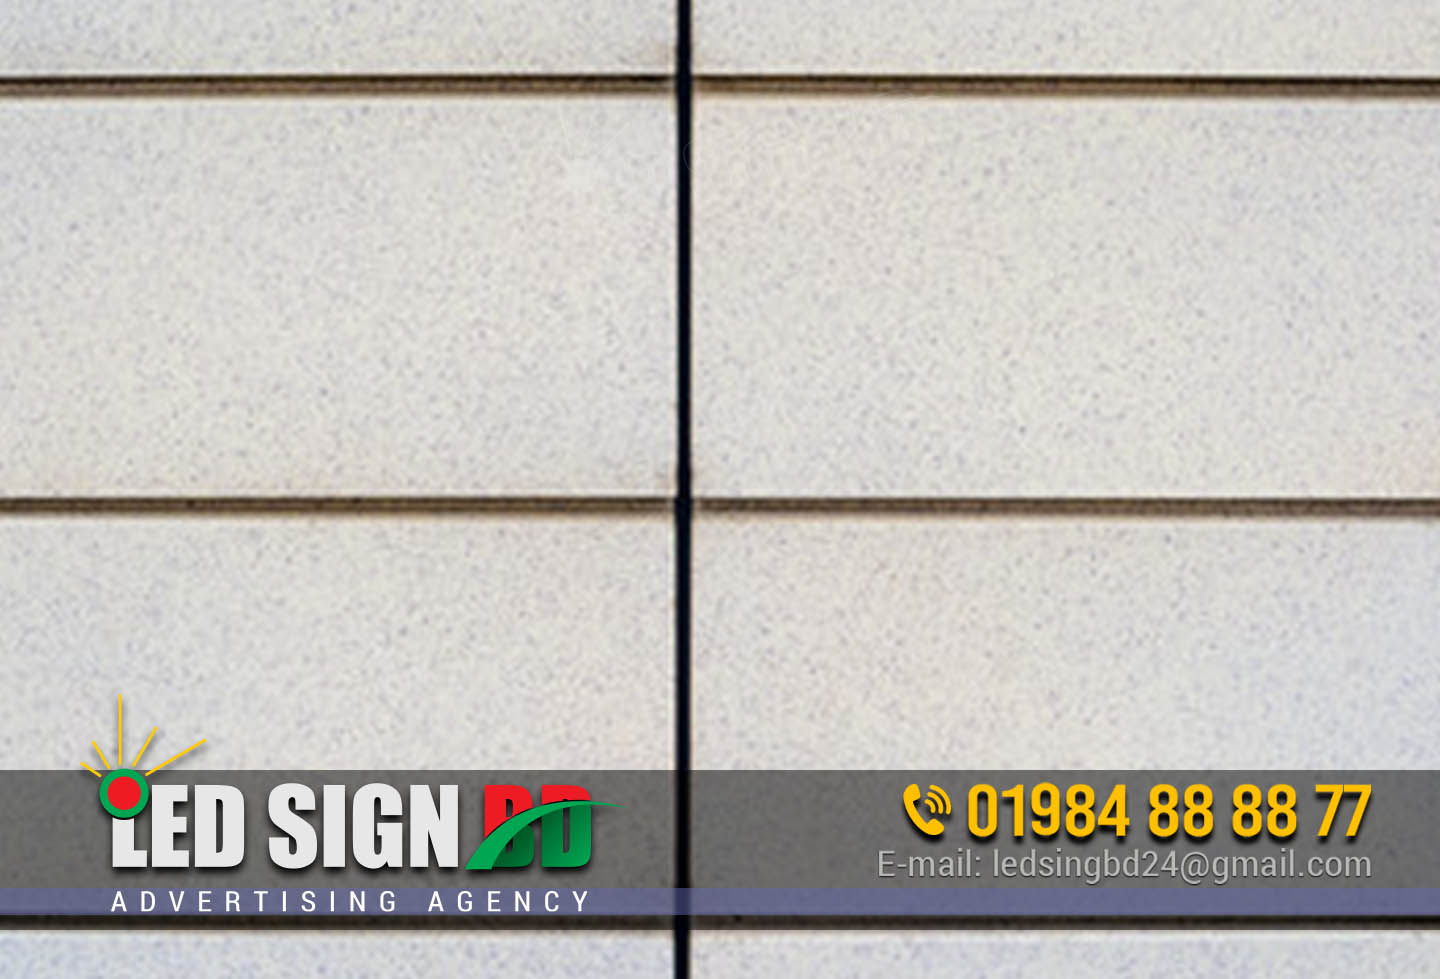 ACP/Aluminium Composite Panel Cutting BD Price Leave a Comment / Acp Off Cut Board, Composite ACP Sheet, LED Acrylic Sign / By LedSjgnBdltd We are the leading ACP board supplier in Dhaka and have been in business for over 10 years. We offer a wide range of high quality ACP boards that are perfect for any commercial or residential project. Our experienced team can help you choose the right ACP board for your needs and budget. ACP boards are a popular choice for both indoor and outdoor use. They are durable and easy to maintenance. ACP boards are also fire resistant and soundproof. This makes them an ideal option for use in high-traffic areas. ACP/Aluminium Composite Panel Cutting BD Price. ACP/Aluminium Composite Panel Cutting BD Price ACP/Aluminium Composite Panel Cutting BD Price ACP Board Supplier in Dhaka | ACP/Aluminium Composite Panel Cutting BD Price There are many ACP board suppliers in Dhaka, and each one offers a different selection of products and services. When choosing a supplier, it is important to consider what type of ACP board you need, as well as the price and quality of the products. Led Sign BD Ltd is one of the leading suppliers of ACP boards in Dhaka. They offer a wide range of products, including both standard and custom boards. Led Sign BD Ltd also provides a comprehensive design and installation service, which can be a great help if you are not experienced in working with ACP boards. Shah Cement is another popular supplier of ACP boards in Dhaka. ACP/Aluminium Composite Panel Cutting BD Price. They offer a wide variety of boards, including both standard and custom sizes. Shah Cement also provides an excellent installation service, and their prices are very competitive. Finally, M.I. Cement is a leading supplier of ACP boards in Dhaka. They offer a wide range of products, including both standard and custom boards. M.I. Cement also provides a comprehensive design and installation service, which can be a great help if you are not experienced in working with ACP boards. A different option for interior and exterior design | ACP/Aluminium Composite Panel Cutting BD Price In Dhaka, one popular option for interior and exterior design is ACP Board supplier. ACP Board supplier offers a variety of products and services that can meet the needs of both commercial and residential customers. Some of the products that ACP Board supplier offers include: wood composite paneling, aluminum composite panels, natural stone veneers, and more. In addition to their wide array of products, ACP Board supplier also offers installation services. ACP/Aluminium Composite Panel Cutting BD Price. This means that they can help you with everything from choosing the right products for your project to installing them. If you’re looking for an option for your exterior or interior design that is different from the norm, then ACP Board supplier is a great option to consider. Their wide range of products and services means that they can meet the needs of any customer, and their installation services make them a one-stop shop for all of your design needs. A wide array of colors and texture | ACP/Aluminium Composite Panel Cutting BD Price As one of the most popular board supplier in Dhaka, ACP Board provides a wide array of colors and textures for its customers to choose from. The colors include but are not limited to black, white, blue, red, and green, while the textures range from smooth to rough, matte to glossy. This variety allows customers to select the colors and textures that best suit their needs and preferences. Manufactured with recyclable materials ACP boards are made from two types of materials, aluminum and plastic. The aluminum is most often recycled, while the plastic is not. The recyclability of the materials used to make ACP boards is an important factor in their environmental friendliness. ACP boards are also made with a variety of different chemicals and compounds. The majority of these chemicals are safe and pose no threat to the environment. However, there are a few that may be harmful if not disposed of properly. It is important to check with your local recycling center to see if they accept ACP boards before disposing of them. ACP boards are a great way to recycle old materials and give them new life. They can be used for a variety of purposes, from decoration to protection. If you are looking for a way to green your home or office, ACP boards are a great option. An environmentally friendly option | ACP/Aluminium Composite Panel Cutting BD Price In this era of heightened awareness of the importance of sustainability, more and more businesses are looking for ways to downsize their ecological footprints. And ACP board supplier is no different. They have long been committed to finding ways to be more environmentally friendly and reduce waste. Their newest initiative is the use of recycled materials to create their products. By recycled materials, we mean materials that would otherwise end up in the landfill. This includes everything from paper and plastic to aluminum and glass. This not only helps to reduce the amount of waste that goes into the landfill, but it also cuts down on the amount of energy and resources required to produce the product in the first place. And it’s not just the environment that benefits from this switch to recycled materials. The use of recycled materials also helps to create jobs in the community. It’s a Win-Win for everyone involved! ACP board supplier is doing their part to create a more sustainable future, and we applaud them for it. The article discusses the ACP board supplier in Dhaka and their benefits. Overall, the ACP board supplier in Dhaka is a great choice for those in the market for a new ACP board. They offer a wide range of boards and are very reasonably priced. They also have a great reputation and are able to provide a high level of customer service. Search For: +88 01984888877 +88 01924756970 aluminium composite panel price in bangladesh. wpc wall panel bangladesh. wpc board price in bangladesh. interior board price in bangladesh. wall paper price in bd. khans interior wallpaper. acp board price in bangladesh. acp price in bangladesh. aluminium composite panel price in bangladesh. acp sheet price in bangladesh. aluminium composite panel in bangladesh. aluminium composite panel in bangladesh. aluminium composite panel price in bangladesh. aluminium composite panel dubai. aluminium composite wall panel. aluminum composite panels. composite aluminum panel. alco board price. acp panel price. bafoni acp. aluminium composite panel. nahee aluminum composite panel ltd. pvc board price in bangladesh. wpc board price in bangladesh. interior board price in bangladesh. acp board price in bangladesh. acp price in bangladesh. acp sheet price in bangladesh. acp board design price. acp board price. acp board price dhaka. acrylic board price in bd. acp board cost. acp board price in bangladesh. acp bangladesh chapter. acp price in bangladesh. acp offcut board bangladesh. acp office offcut board bangladesh.